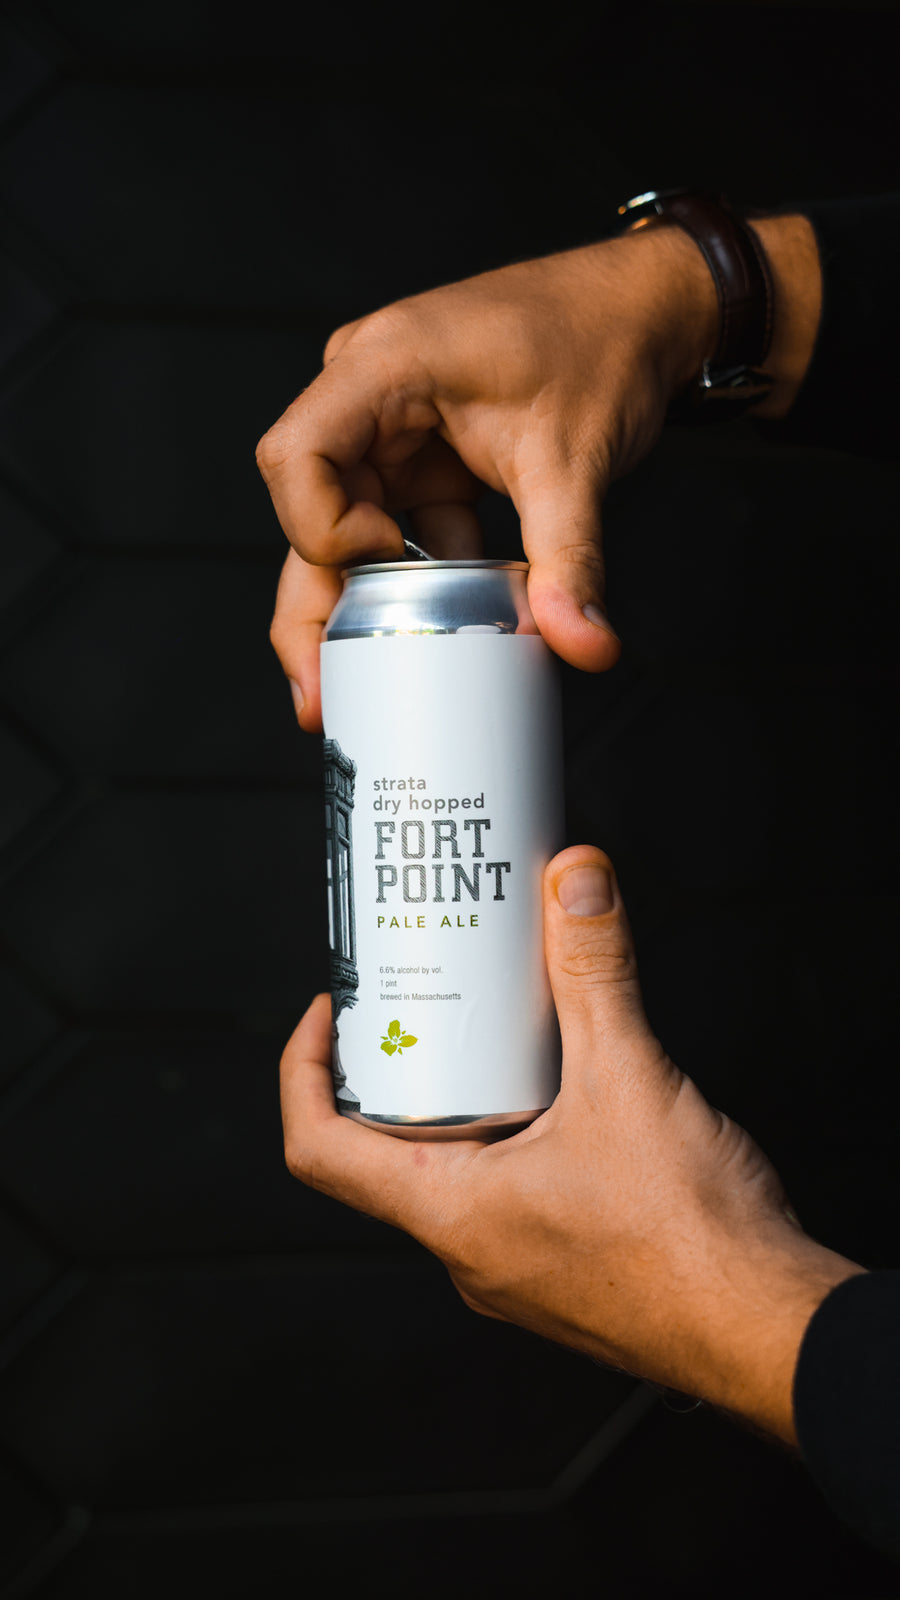 Fort Point Pale Ale Strata